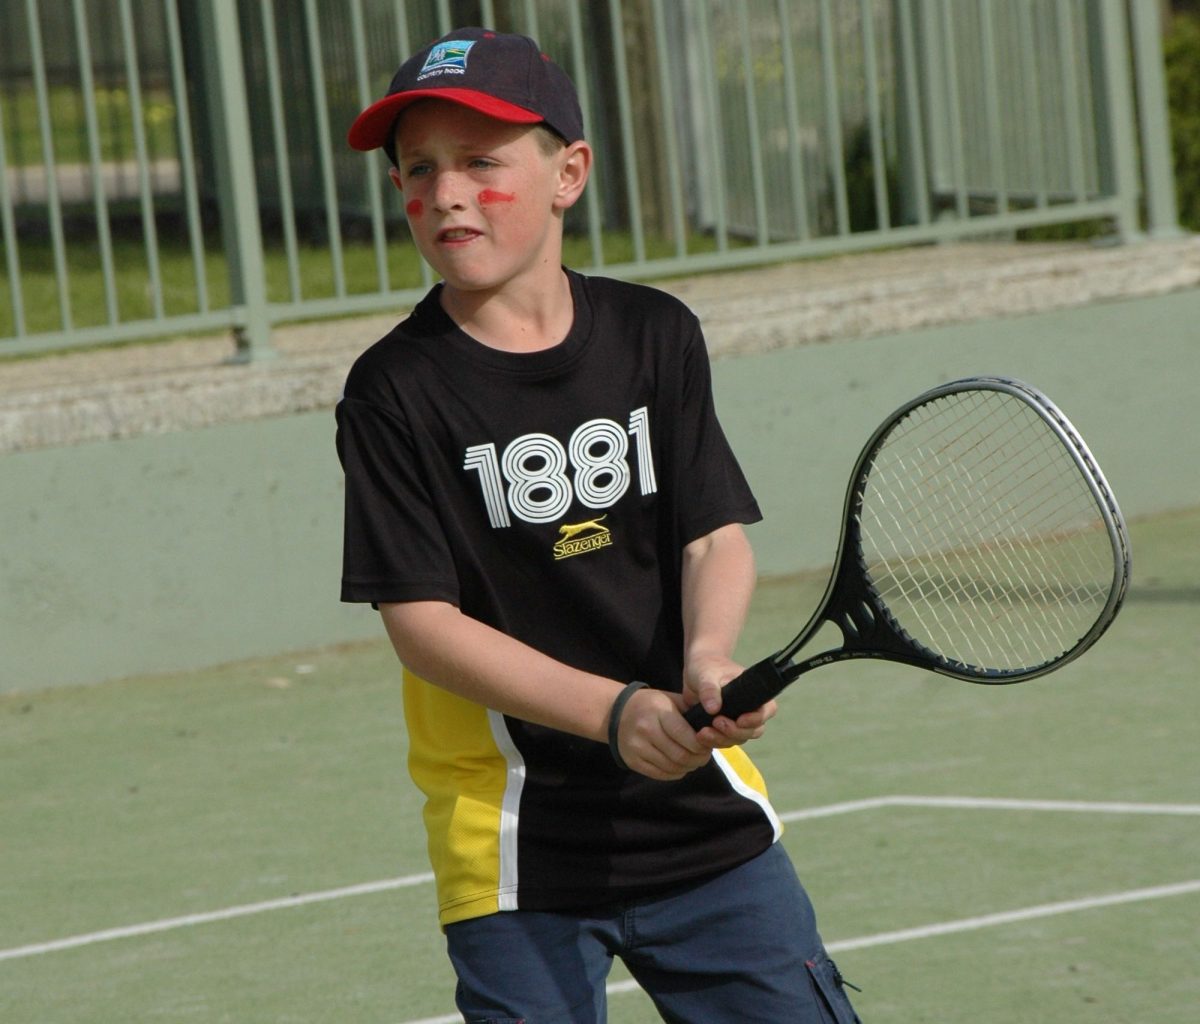 Brumbies rugby player Corey Toole as a kid playing tennis. 